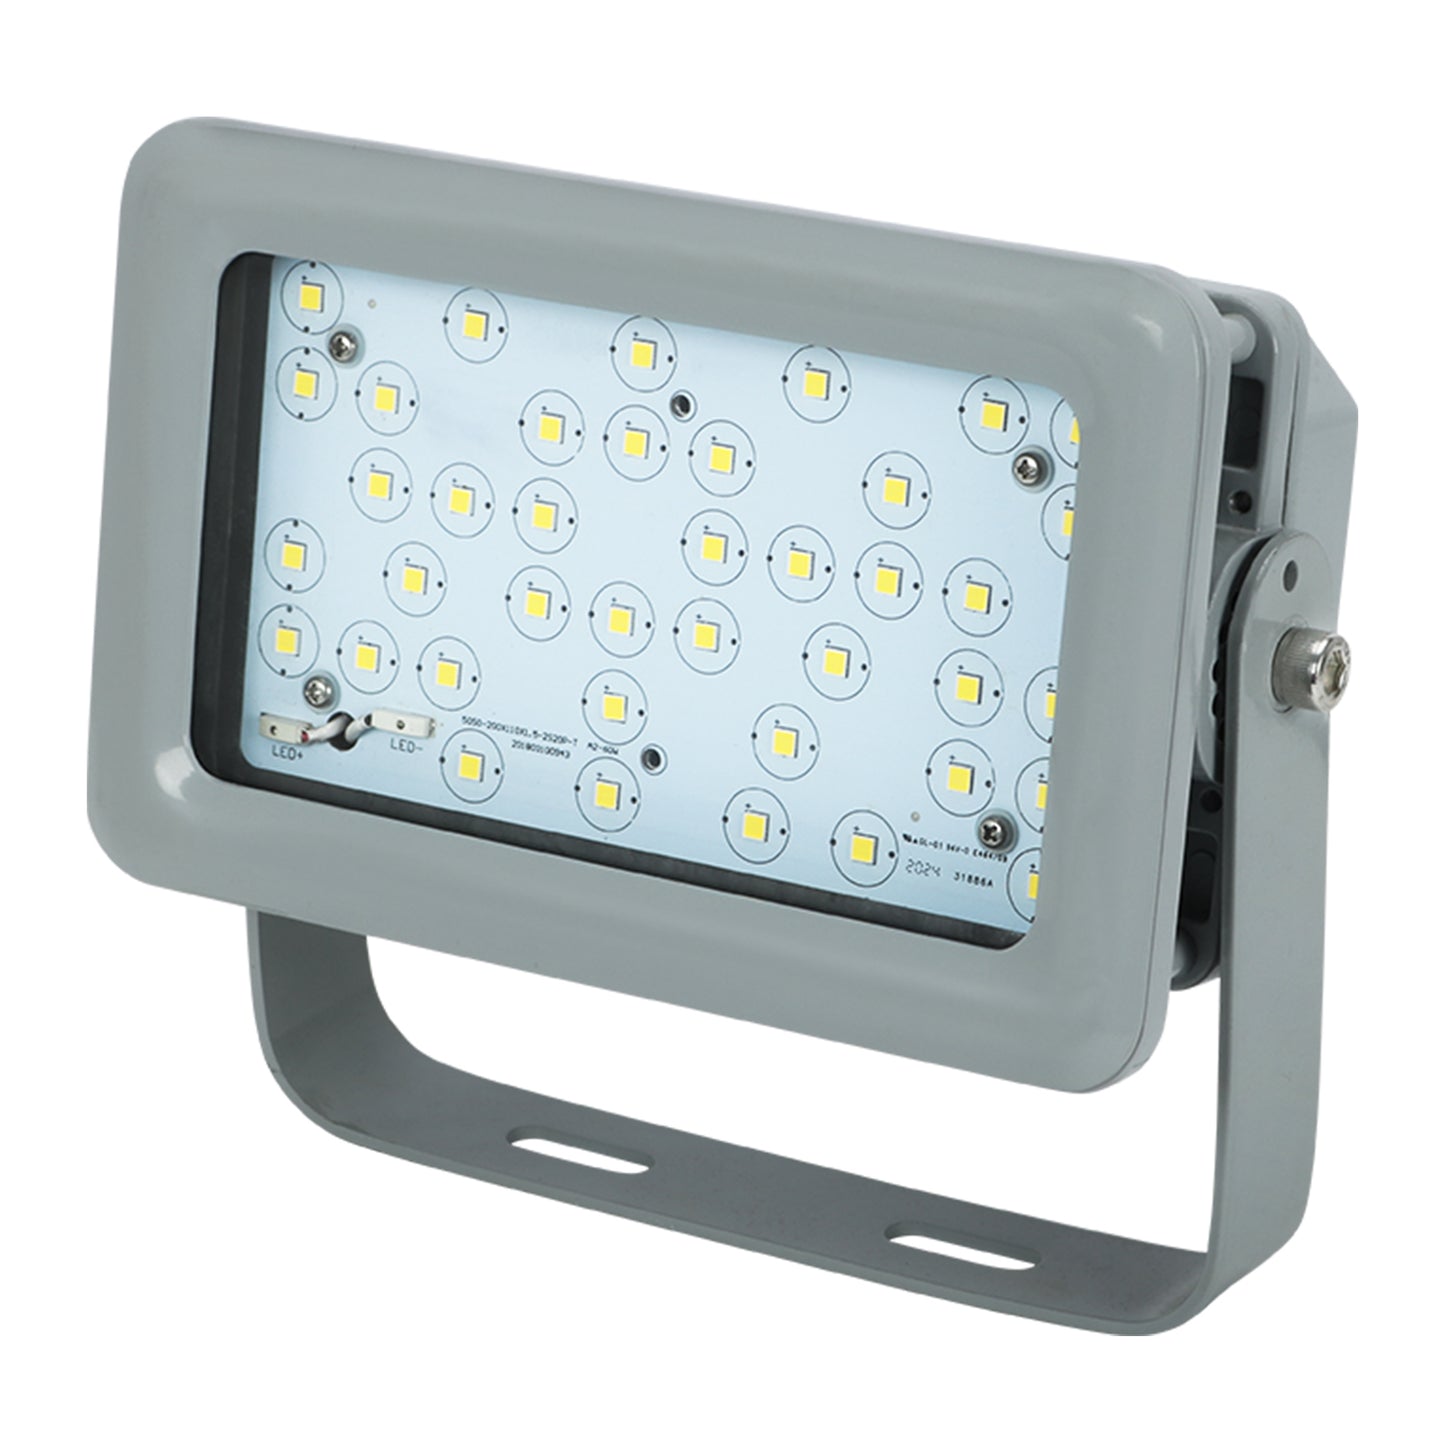 300 Watt LED Explosion Proof Lighting, A Series, Dimmable, 5000K, 42000LM, AC100-277V, IP66, Ideal for Oil & Gas Refineries, Drilling Rigs, Petrochemical Facilities